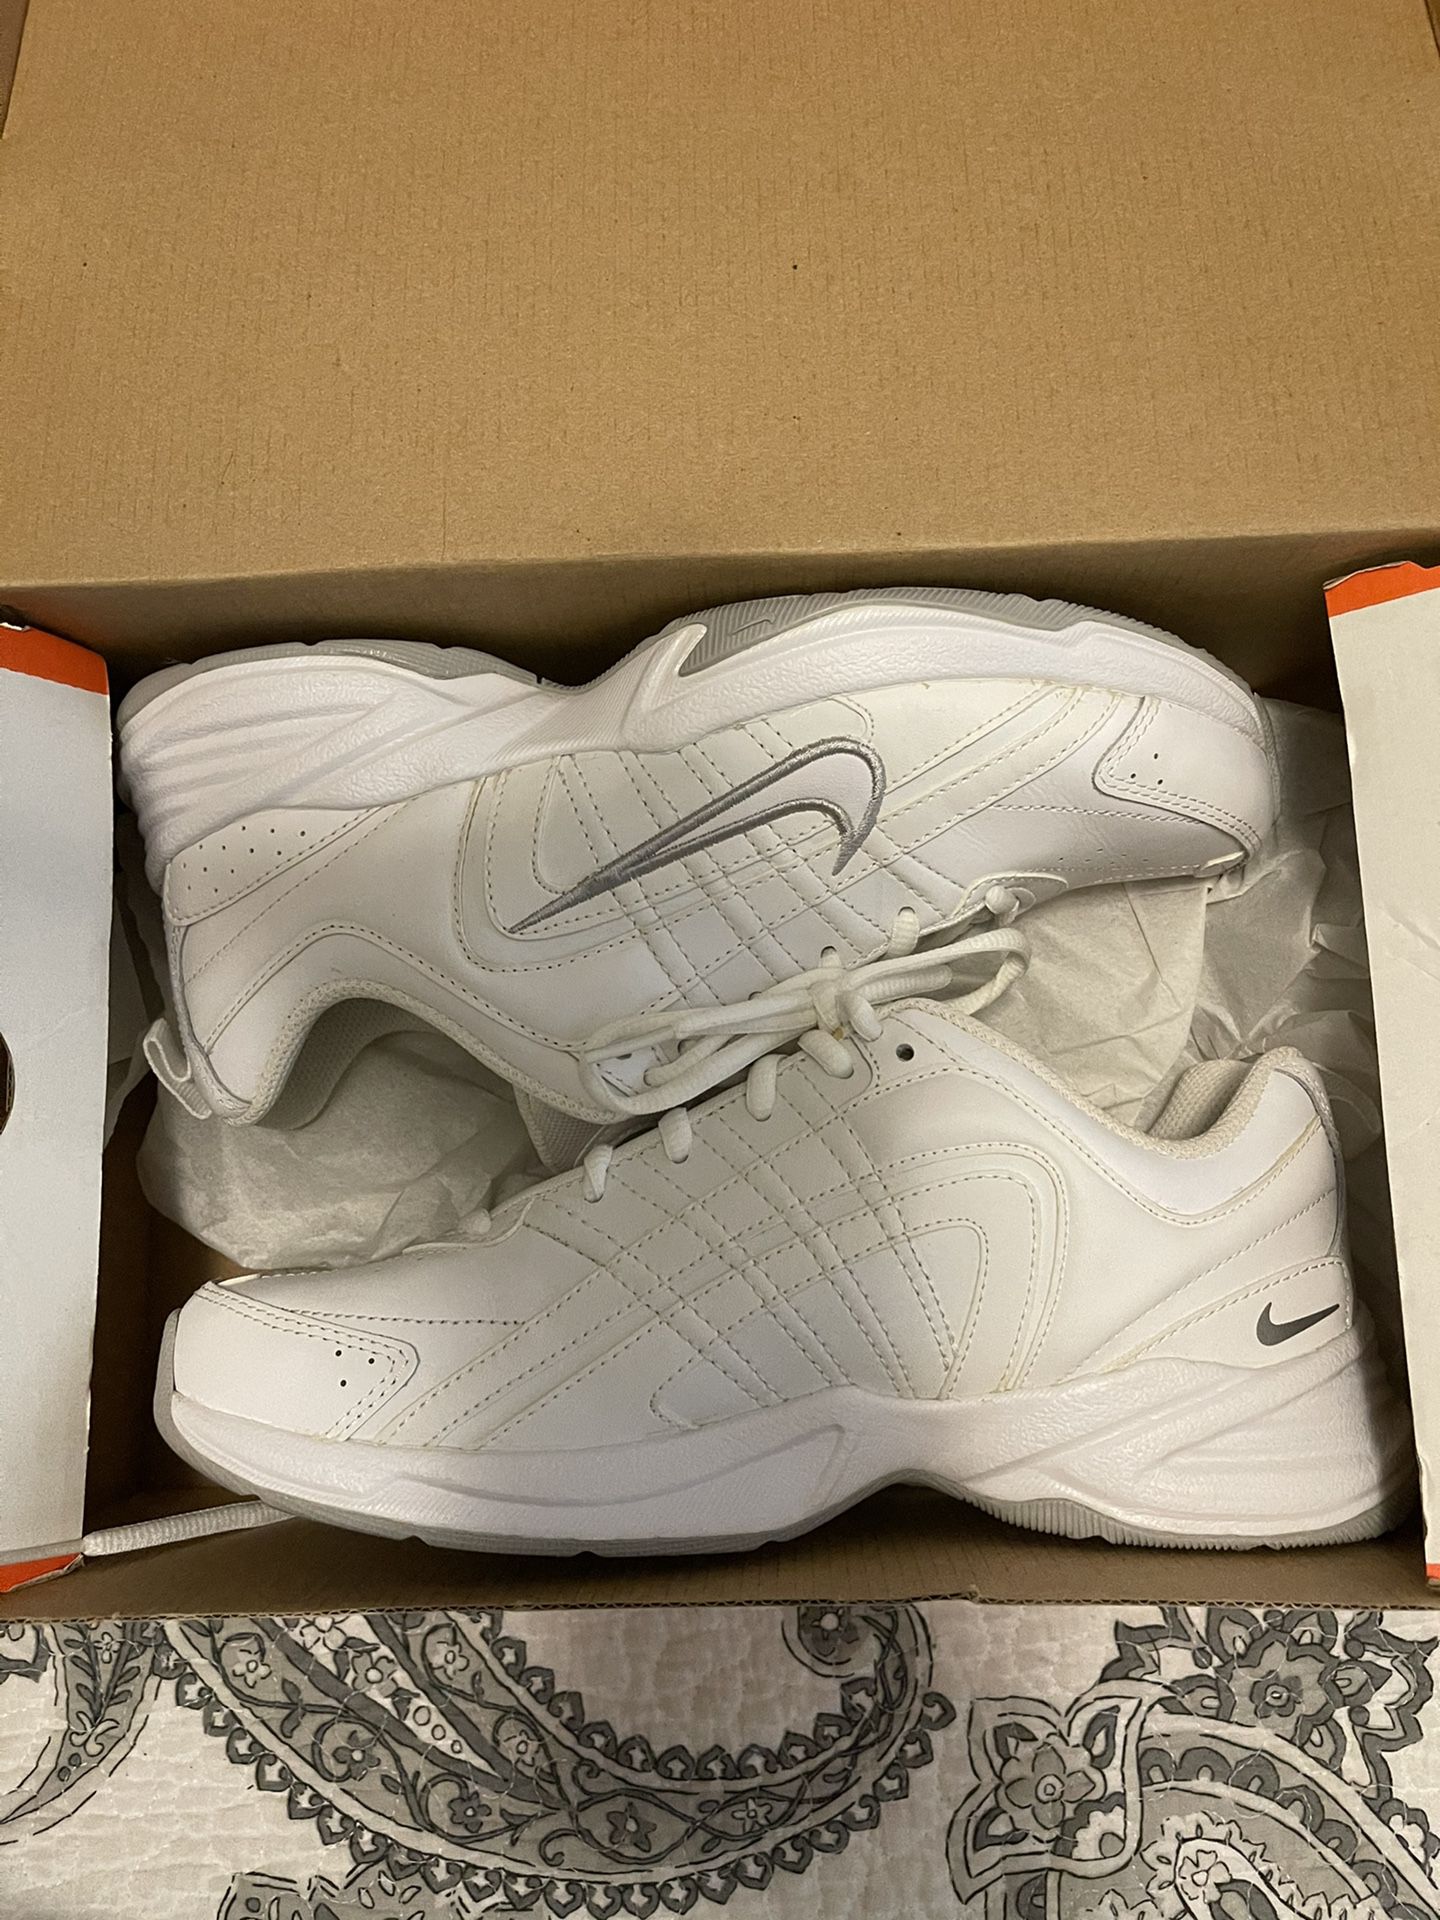 Nike T-lite White Leather Shoes for Sale in Greer, - OfferUp